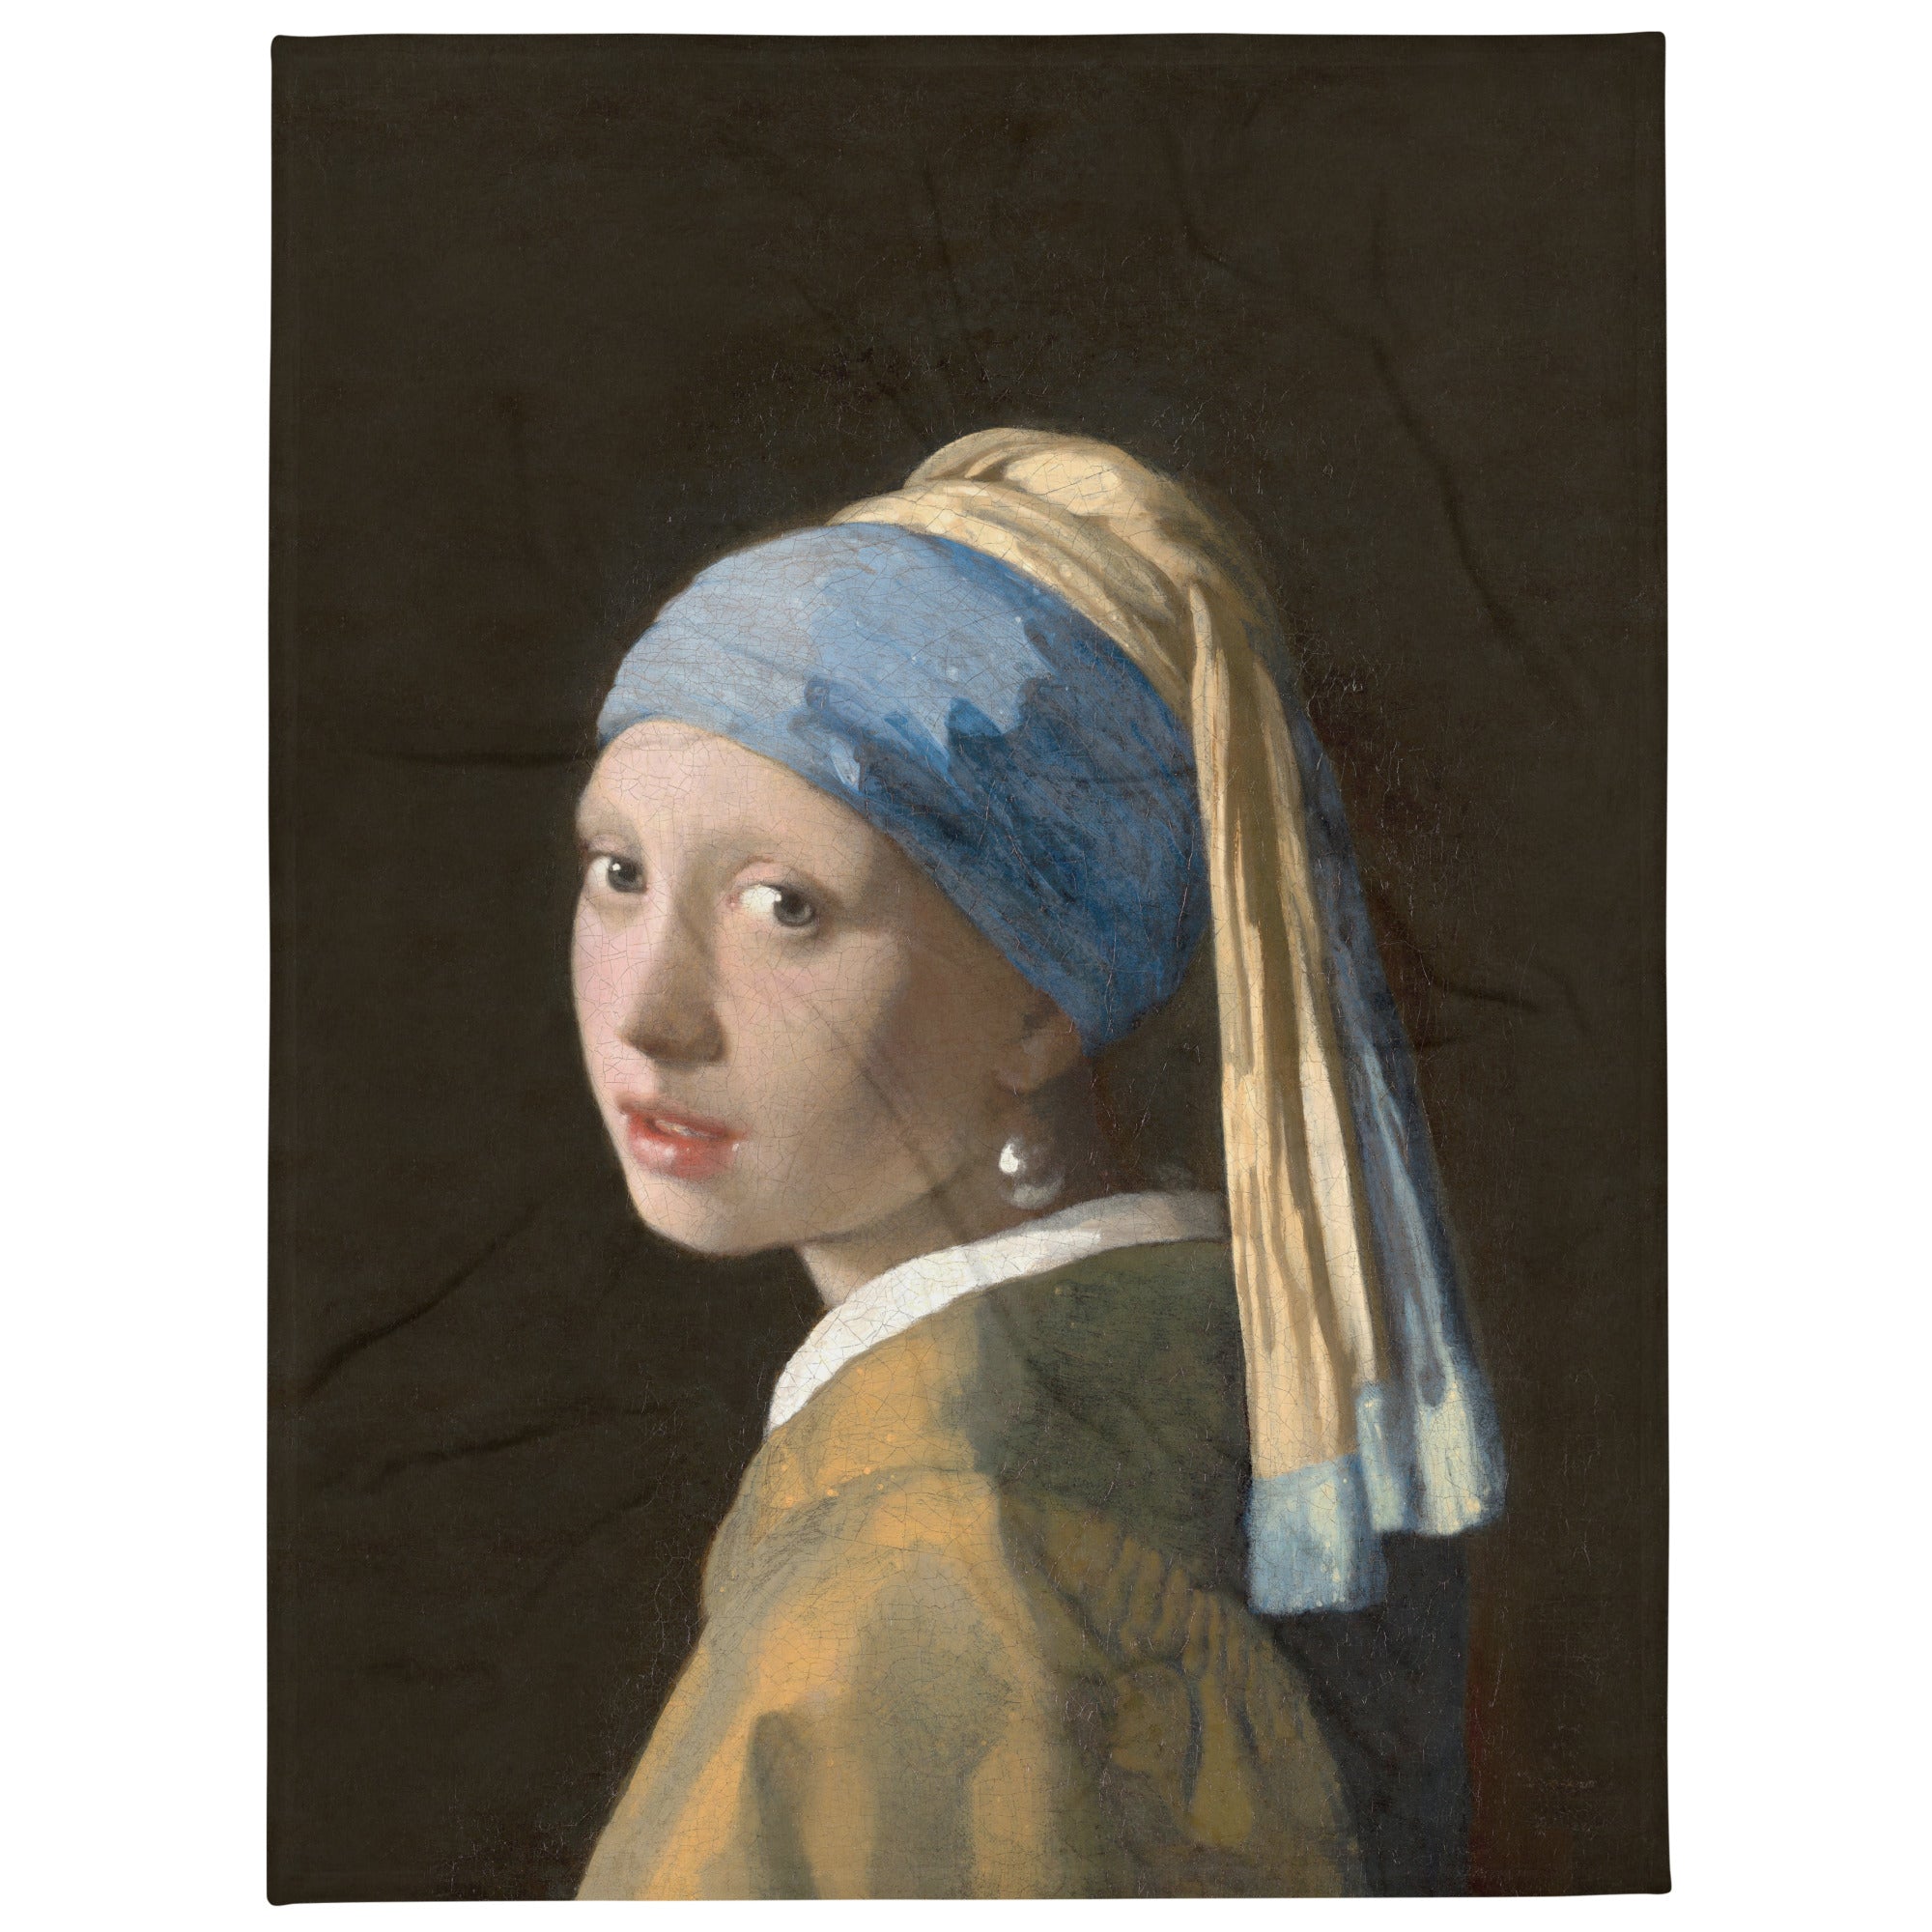 Johannes Vermeer 'Girl with a Pearl Earring' Famous Painting Throw Blanket Vertical | Premium Art Throw